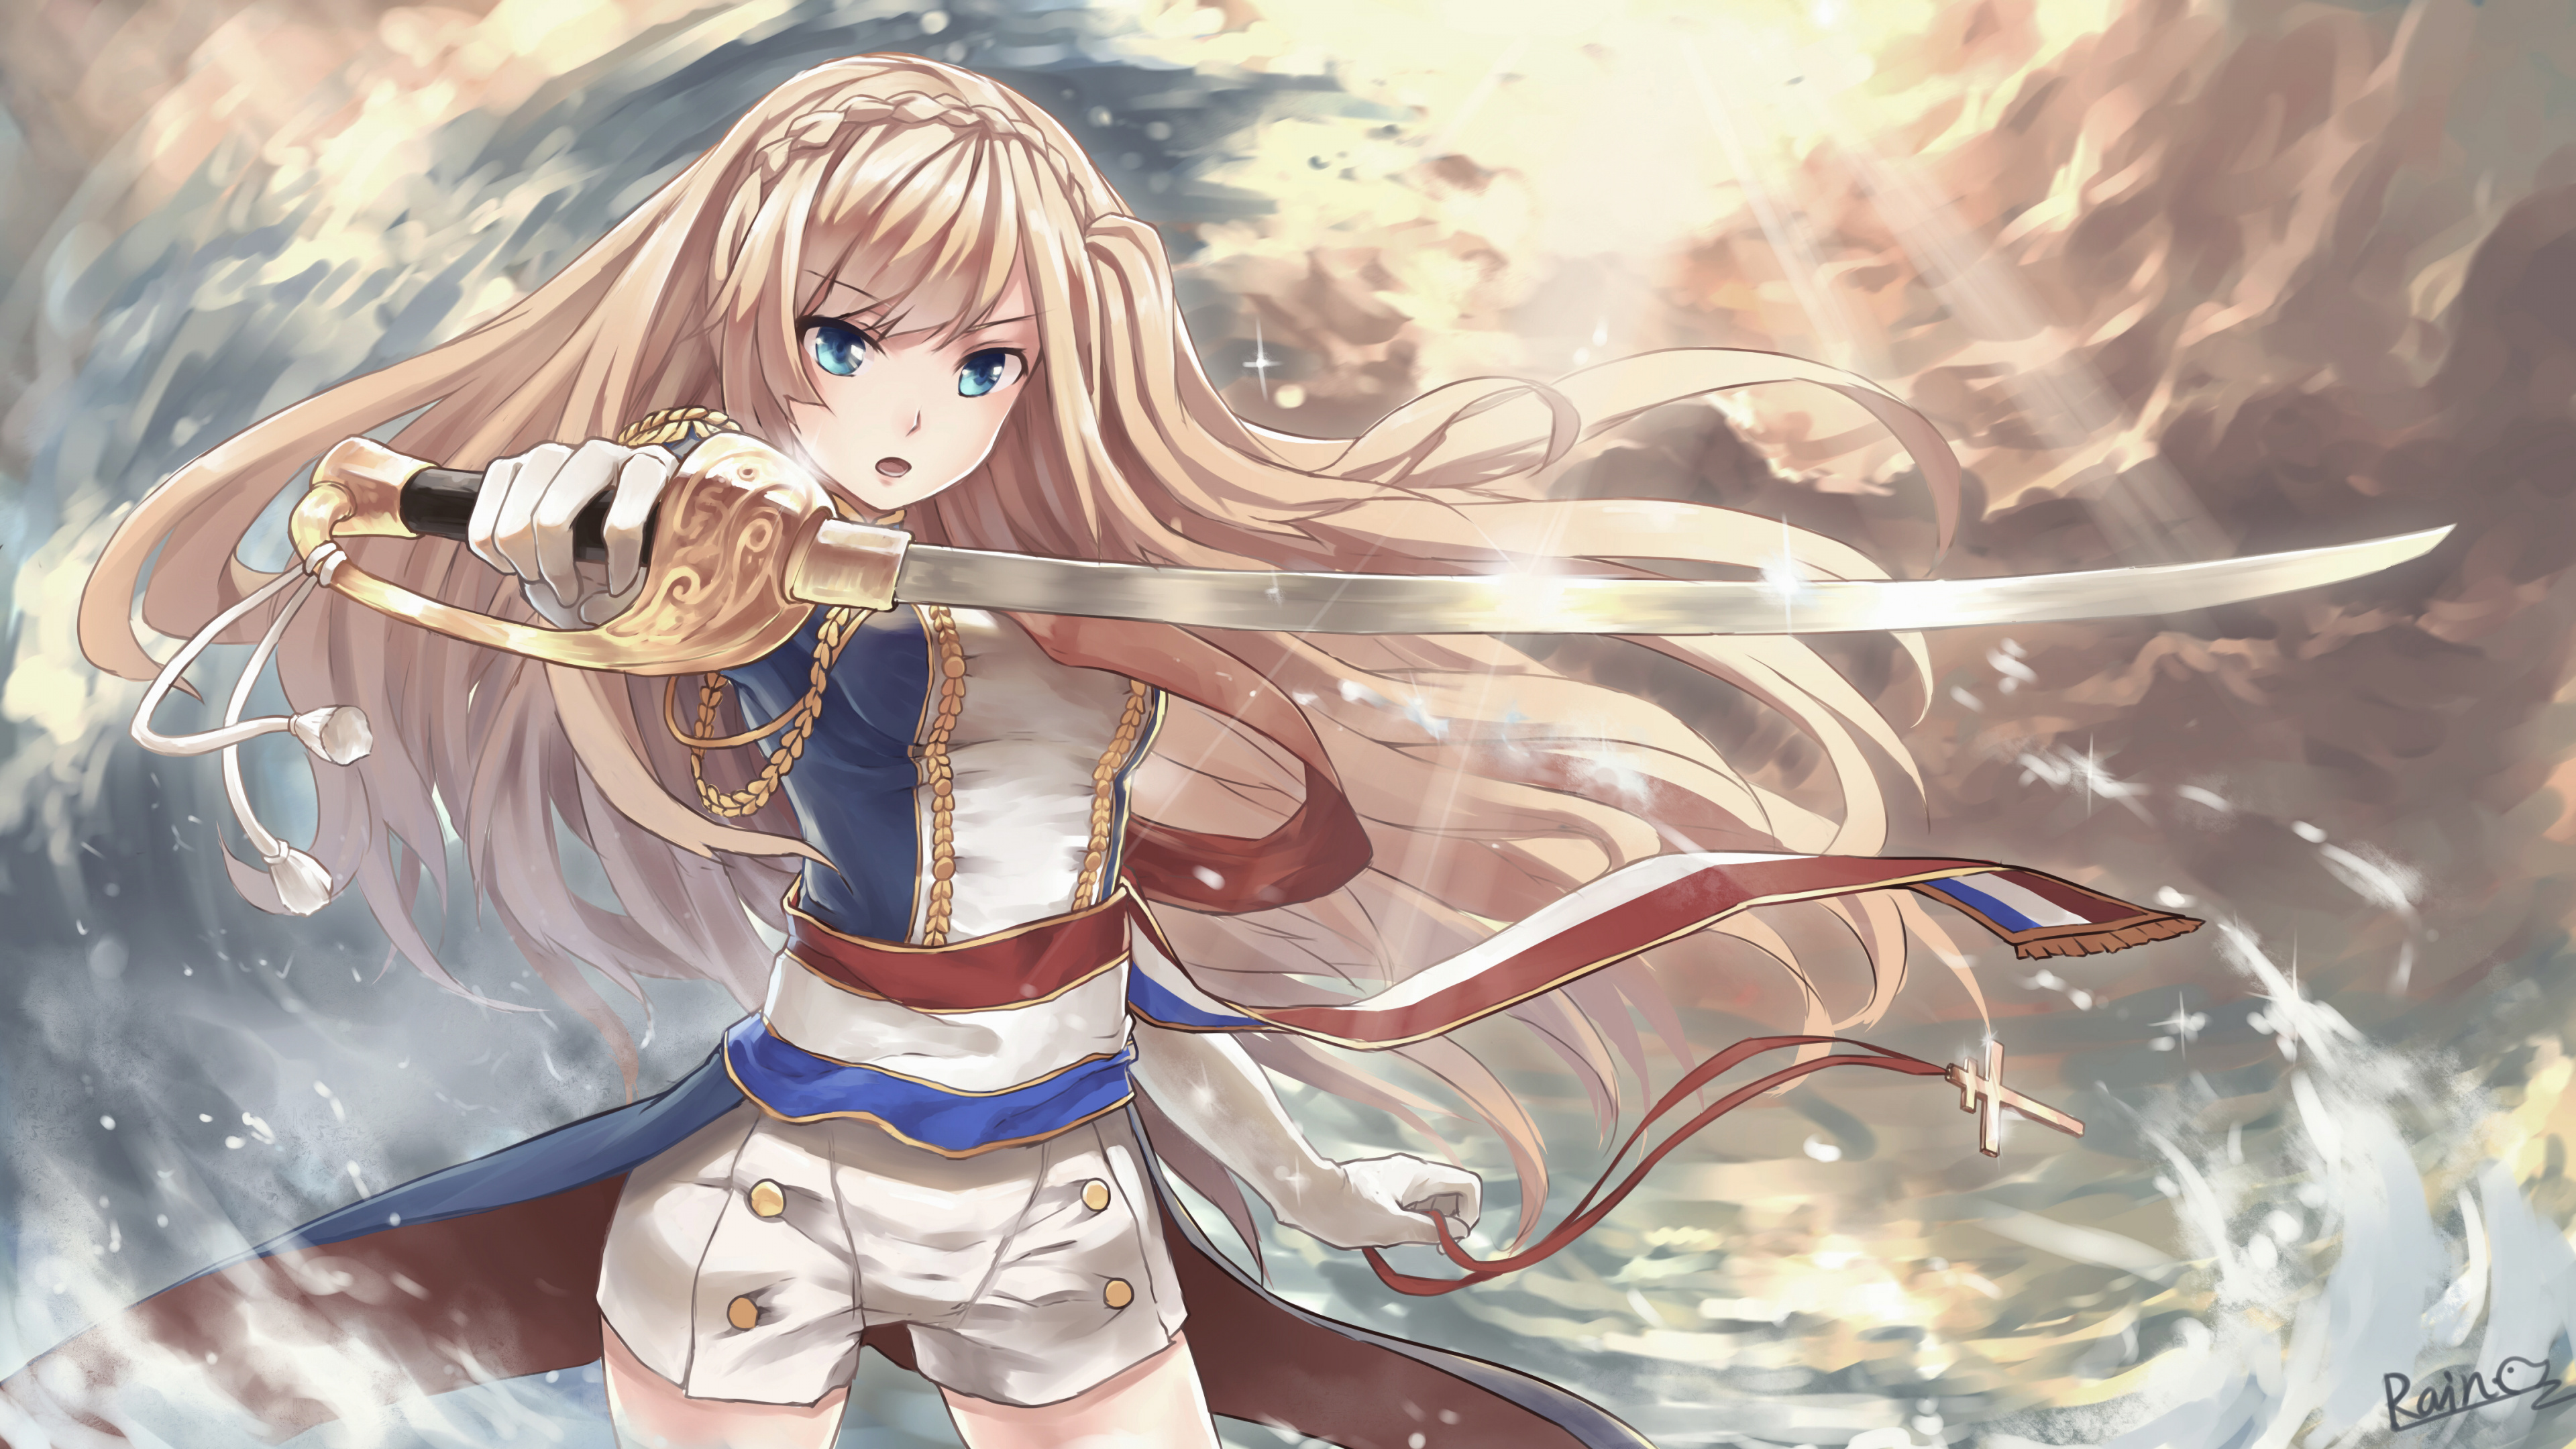 Personnage D'anime Fille Aux Cheveux Blonds. Wallpaper in 3840x2160 Resolution